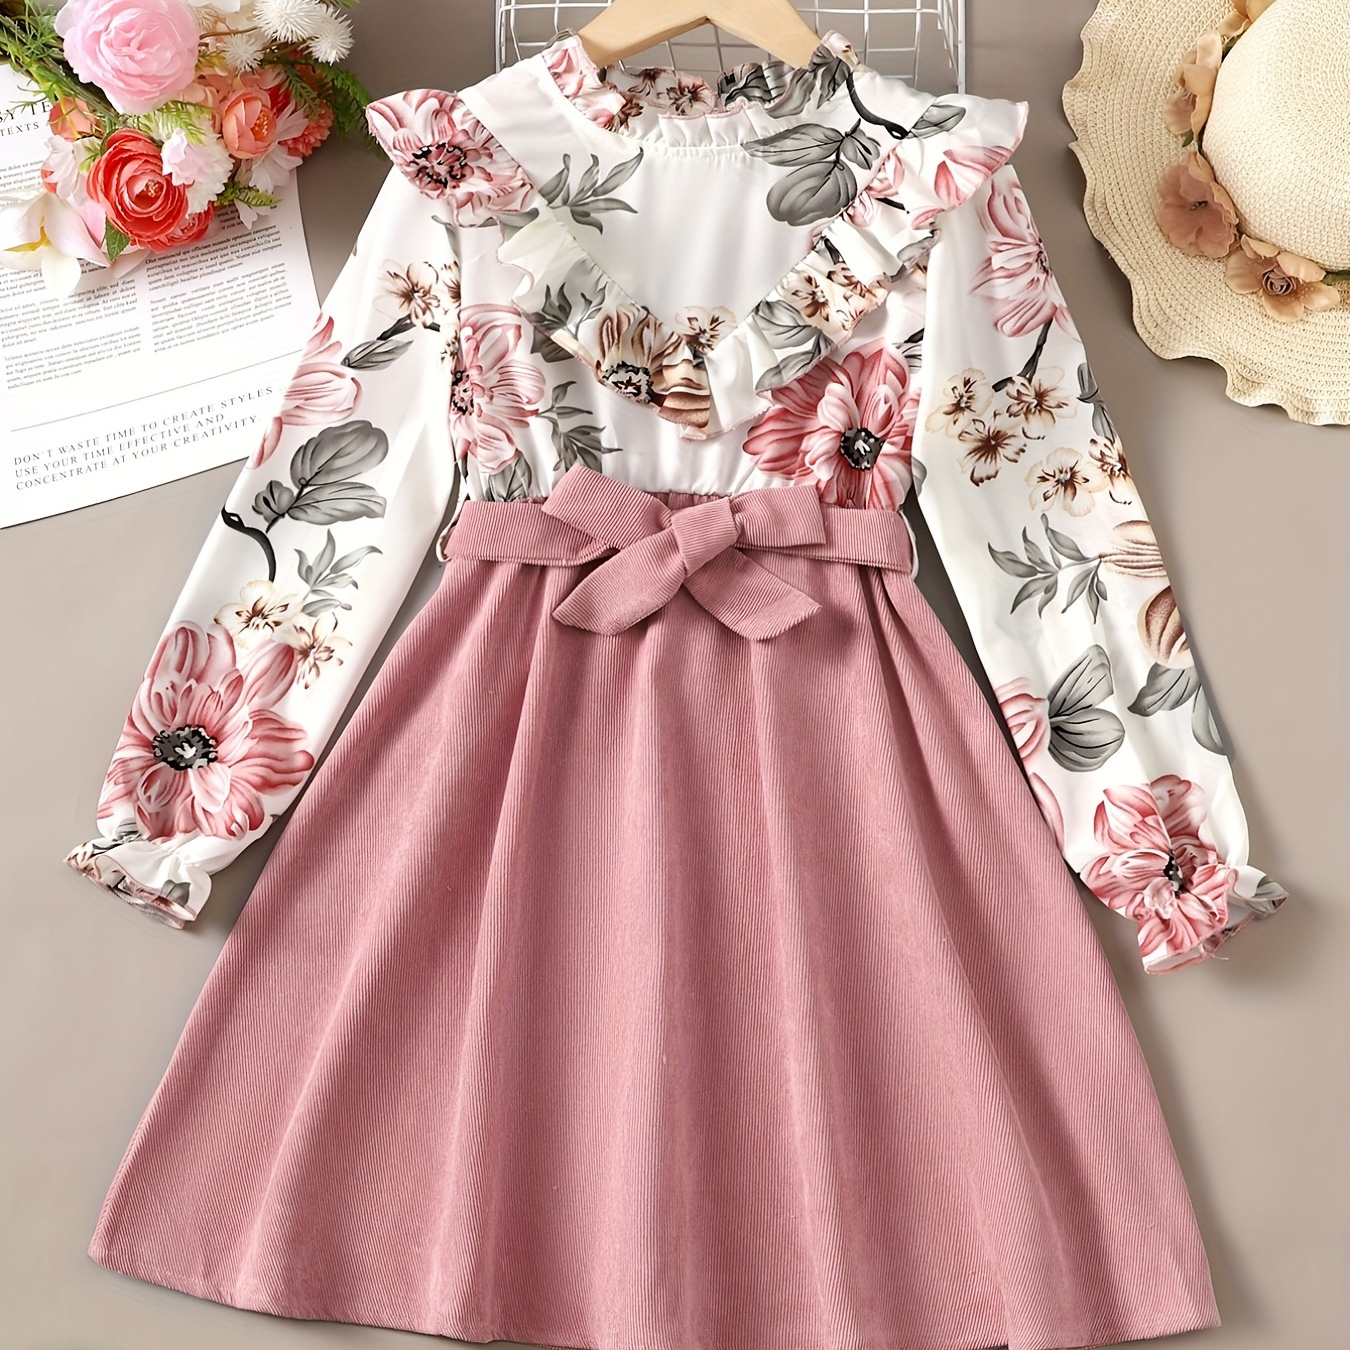 

Girl's Boho Floral Ruffle Collar Long Sleeve Dress For Party Going Out, Kid's Dresses Gift Idea